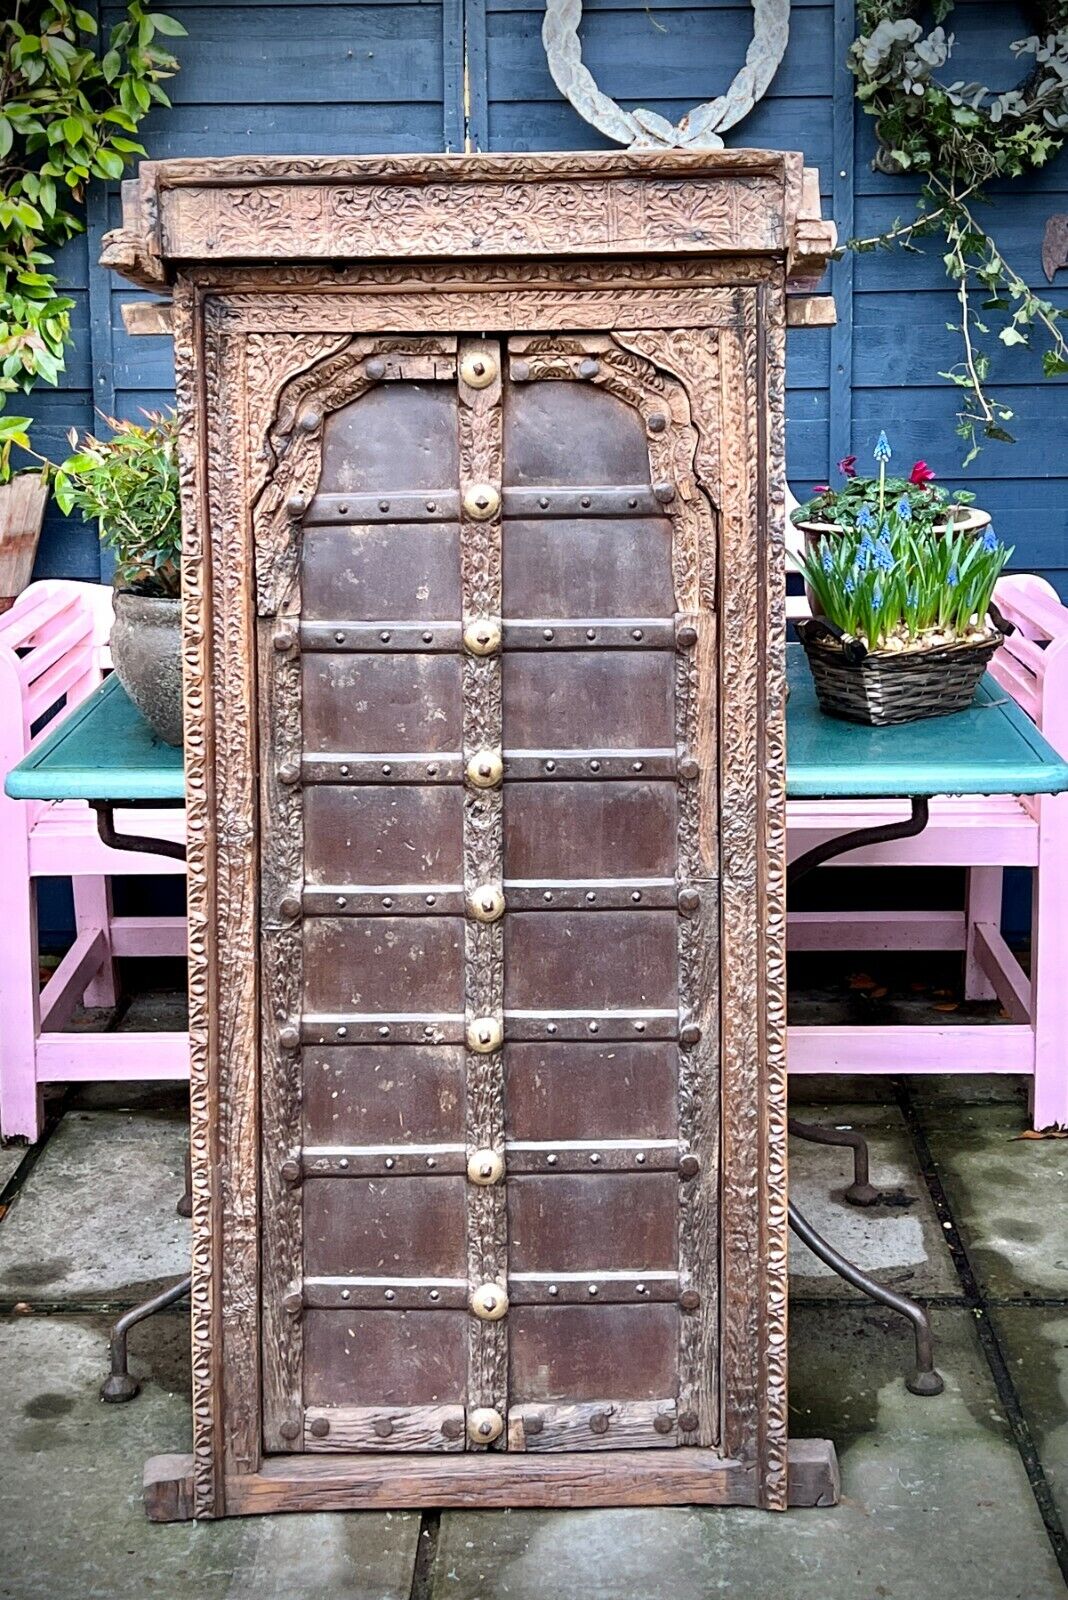 ANTIQUE INDIAN SHUTTERED WINDOW. ARCHITECTURAL SALVAGE FROM HAVELI, SHEKHAWATI.